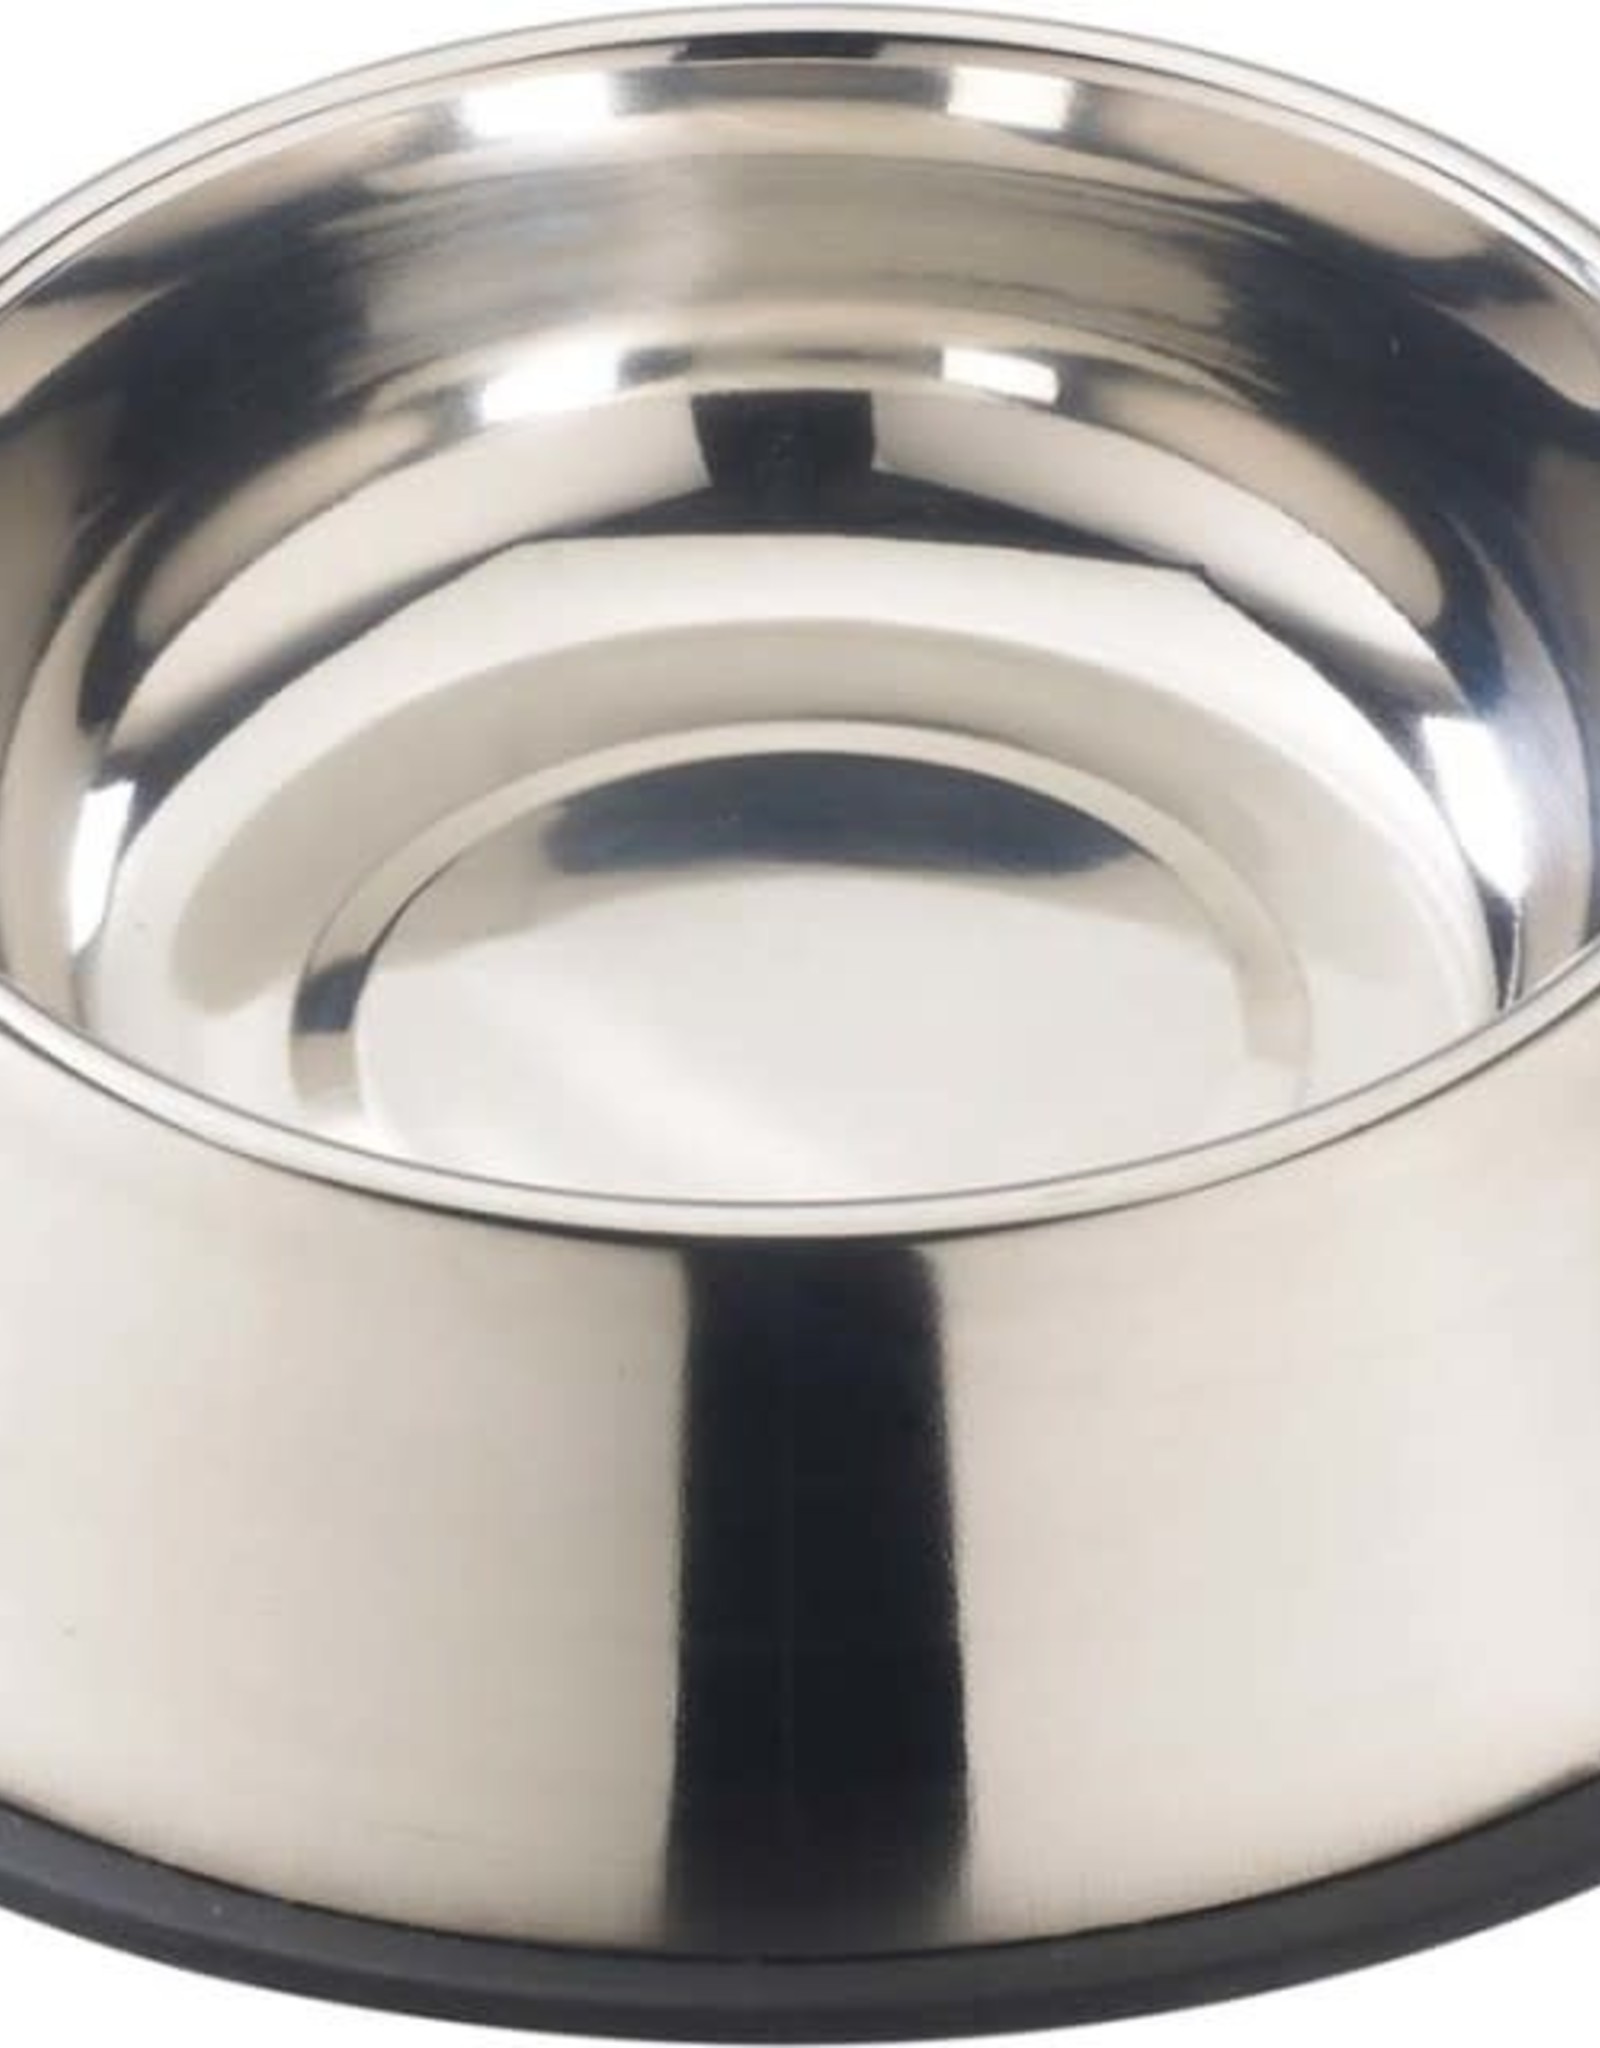 ETHICAL PRODUCT INC Spot Stainless Steel Mirror Finish No-Tip Dog Bowl Silver 1ea/96 oz